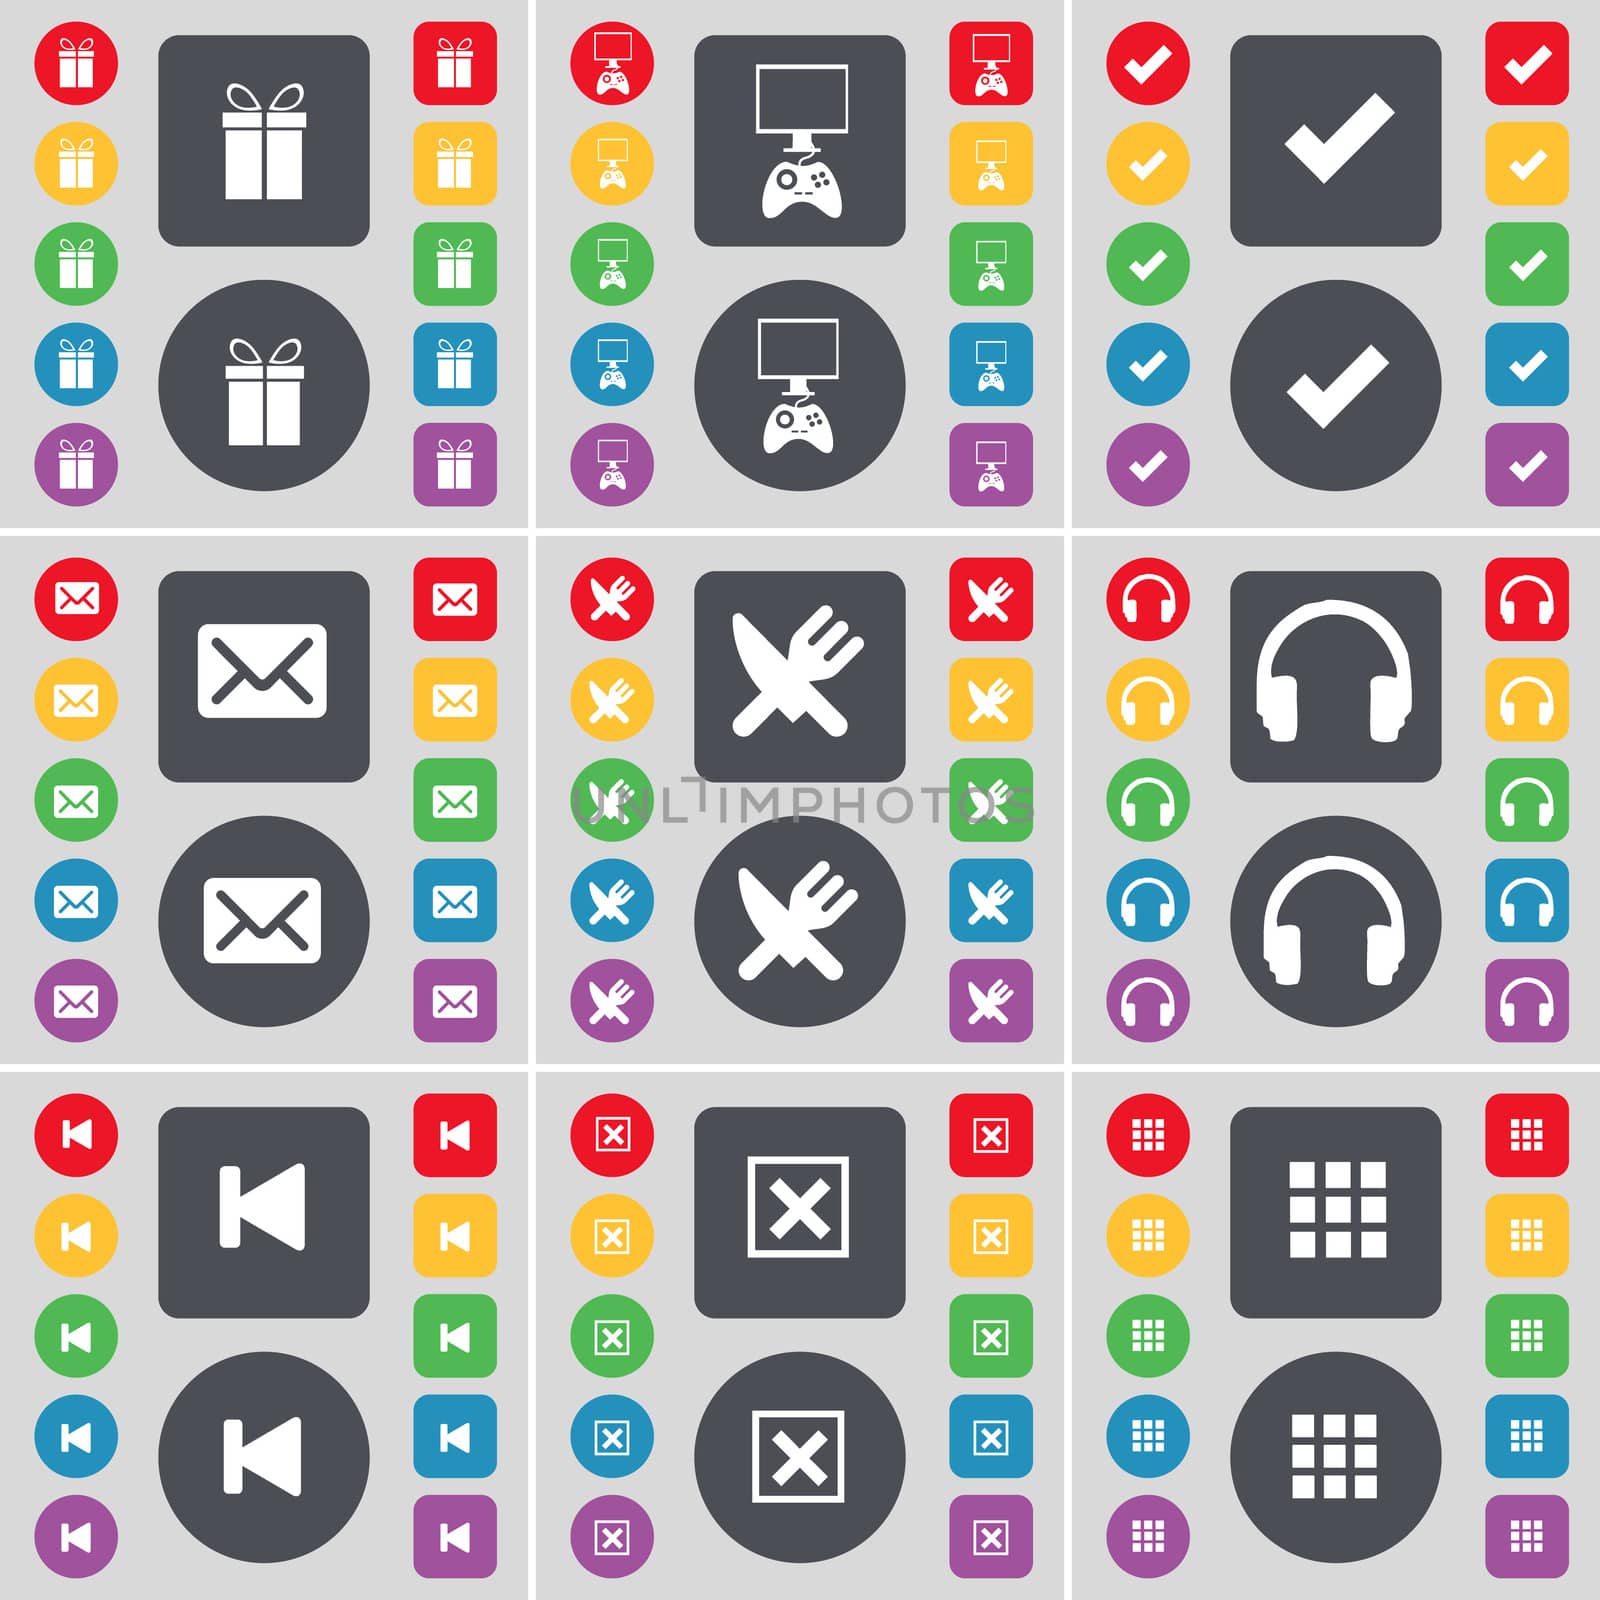 Gift, Game console, Tick, Message, Fork and knife, Headphones, Media skip, Stop, Apps icon symbol. A large set of flat, colored buttons for your design. illustration